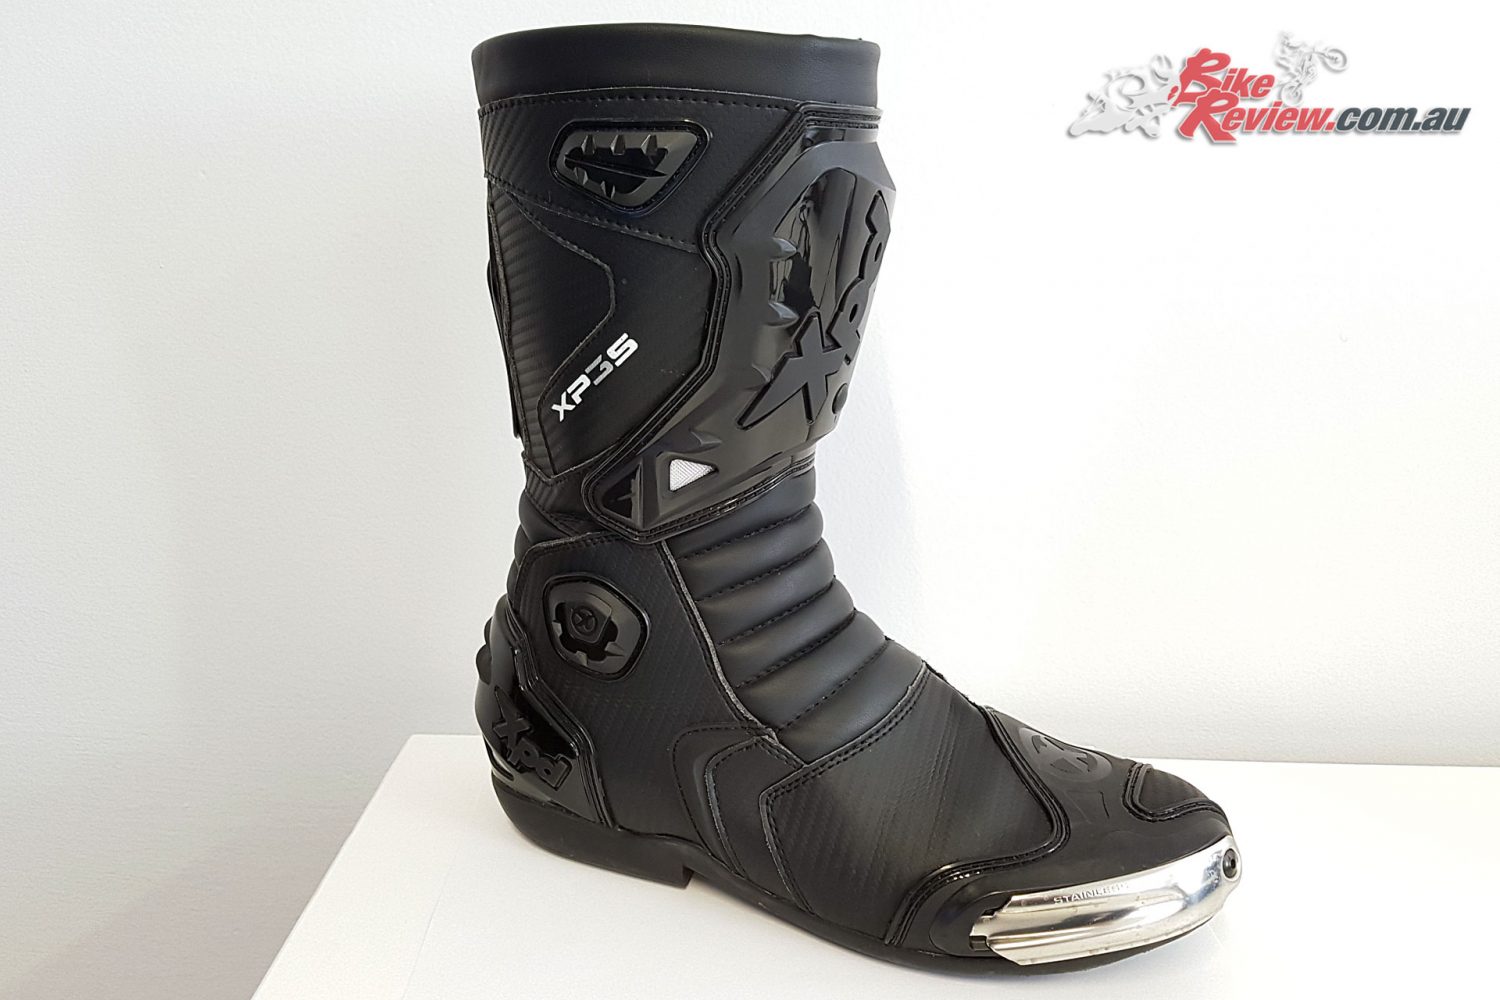 Xpd are a subsidiary of Spidi and offer a range of great boot options